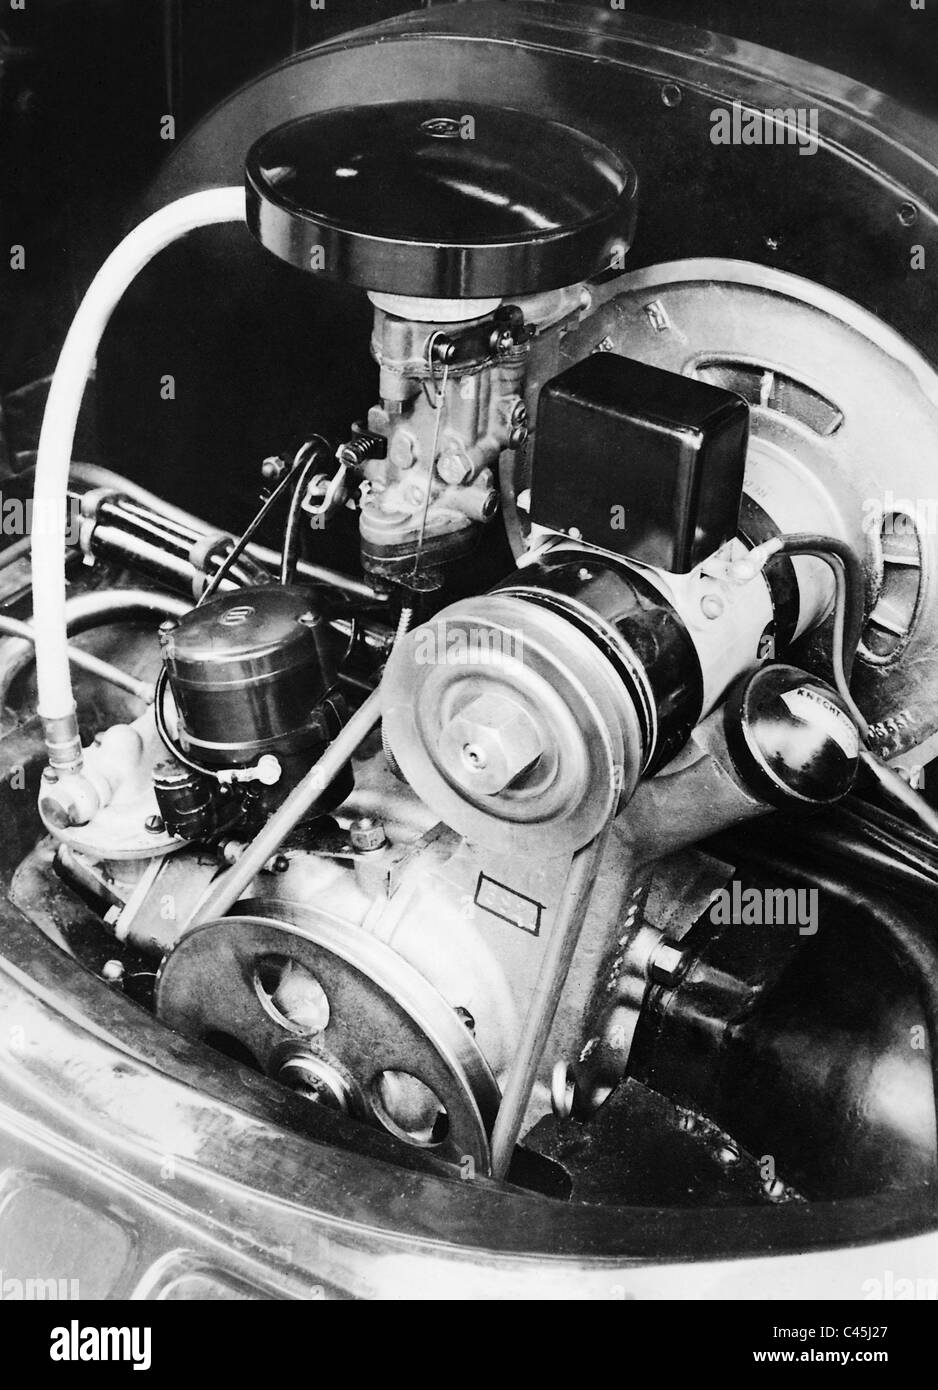 Engine of a VW Beetle, 1938 Stock Photo